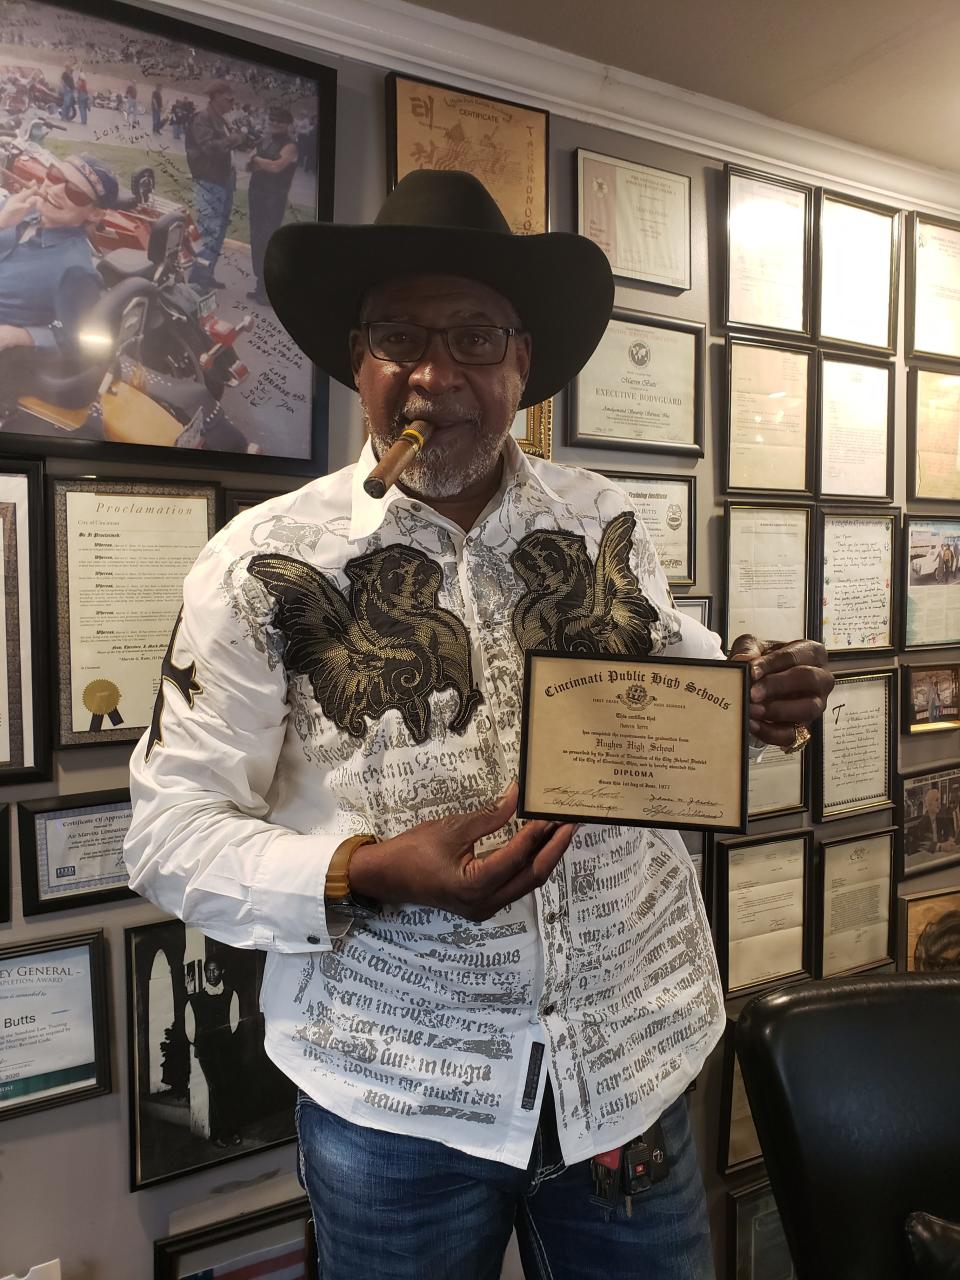 Marvin Butts, owner of Mr. Bubbles Detailing in Pendleton and founder of the Butts Family Foundation, holds his diploma from Hughes High School in his office on Monday, May 8, 2023. The Butts Family Foundation raised thousands of dollars to pay outstanding fees for roughly 300 students at five Cincinnati Public Schools high schools so their diplomas and transcripts would not be withheld.